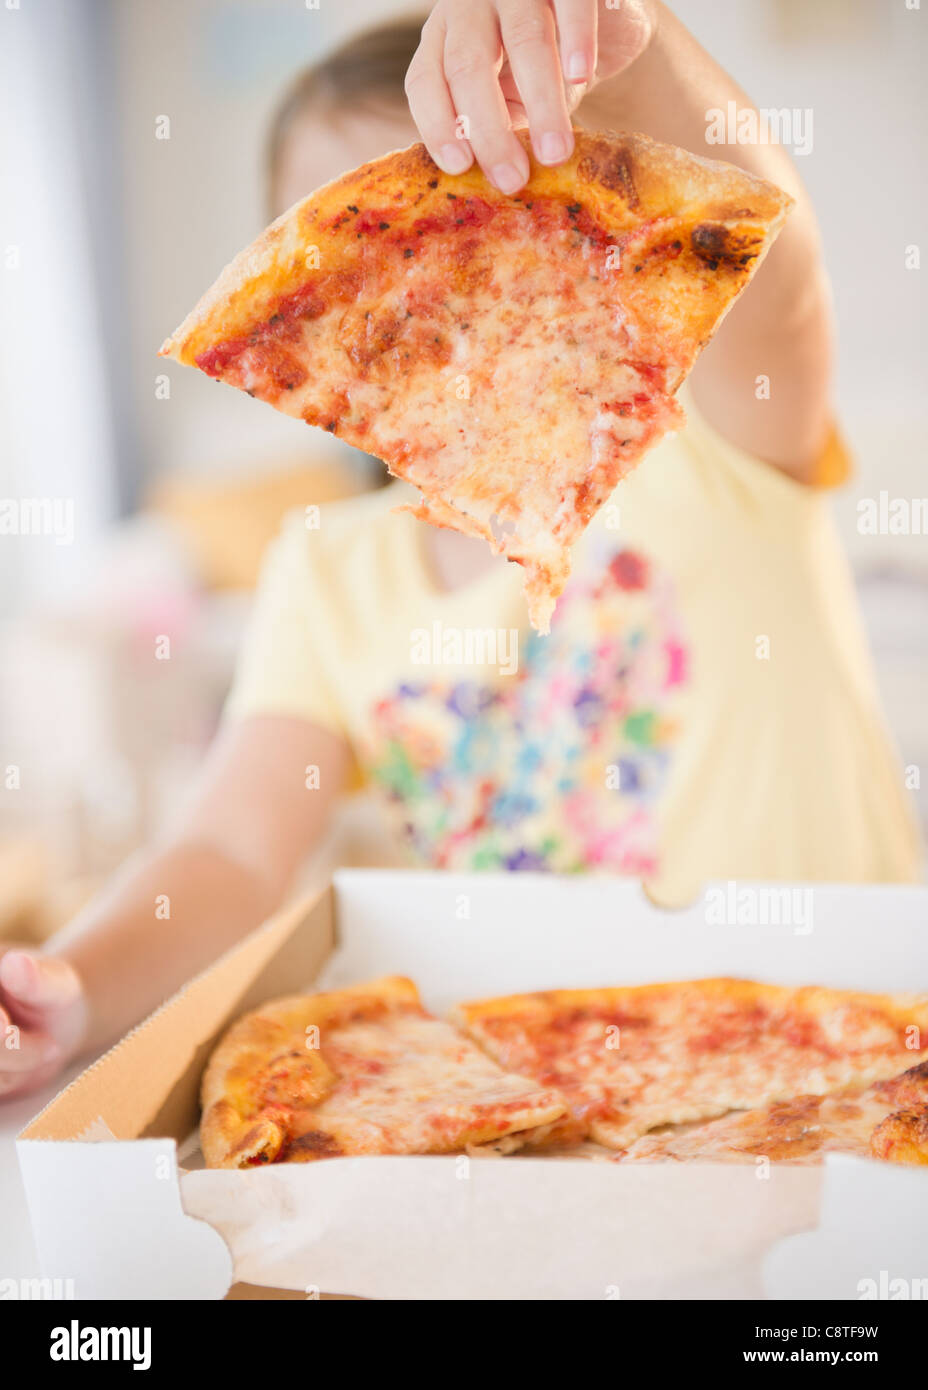 USA, New Jersey, Jersey City, Girl showing slice of pizza Stock Photo